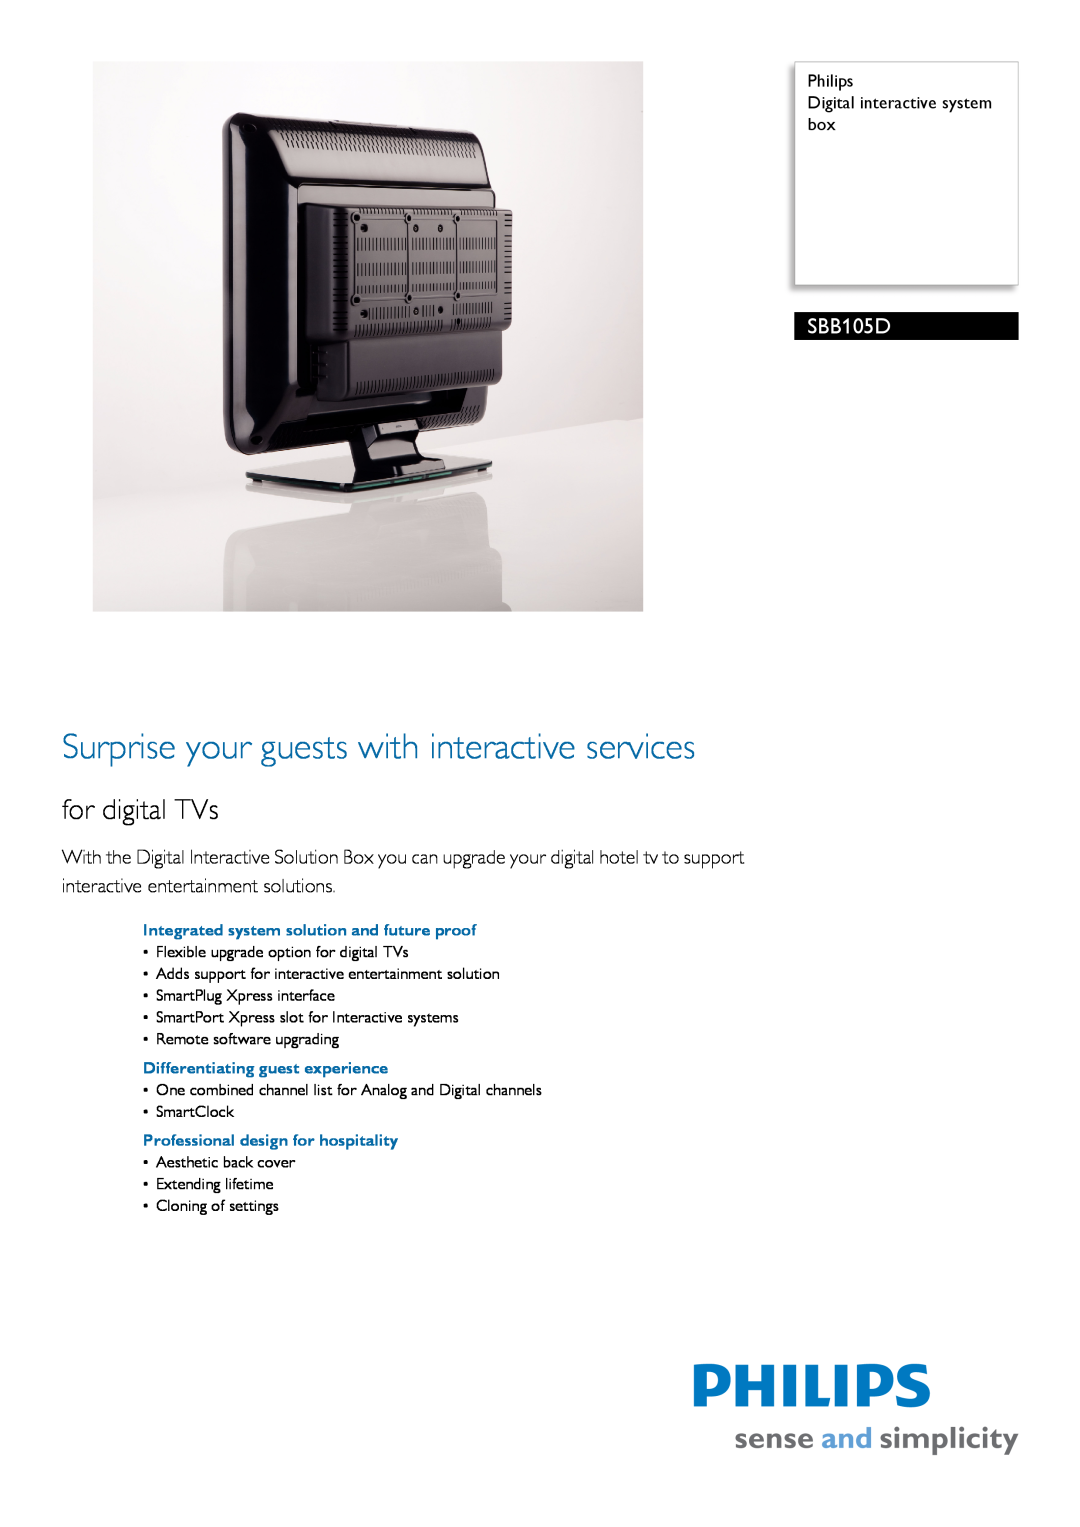 Philips SBB105D manual Philips Digital interactive system box, Surprise your guests with interactive services 